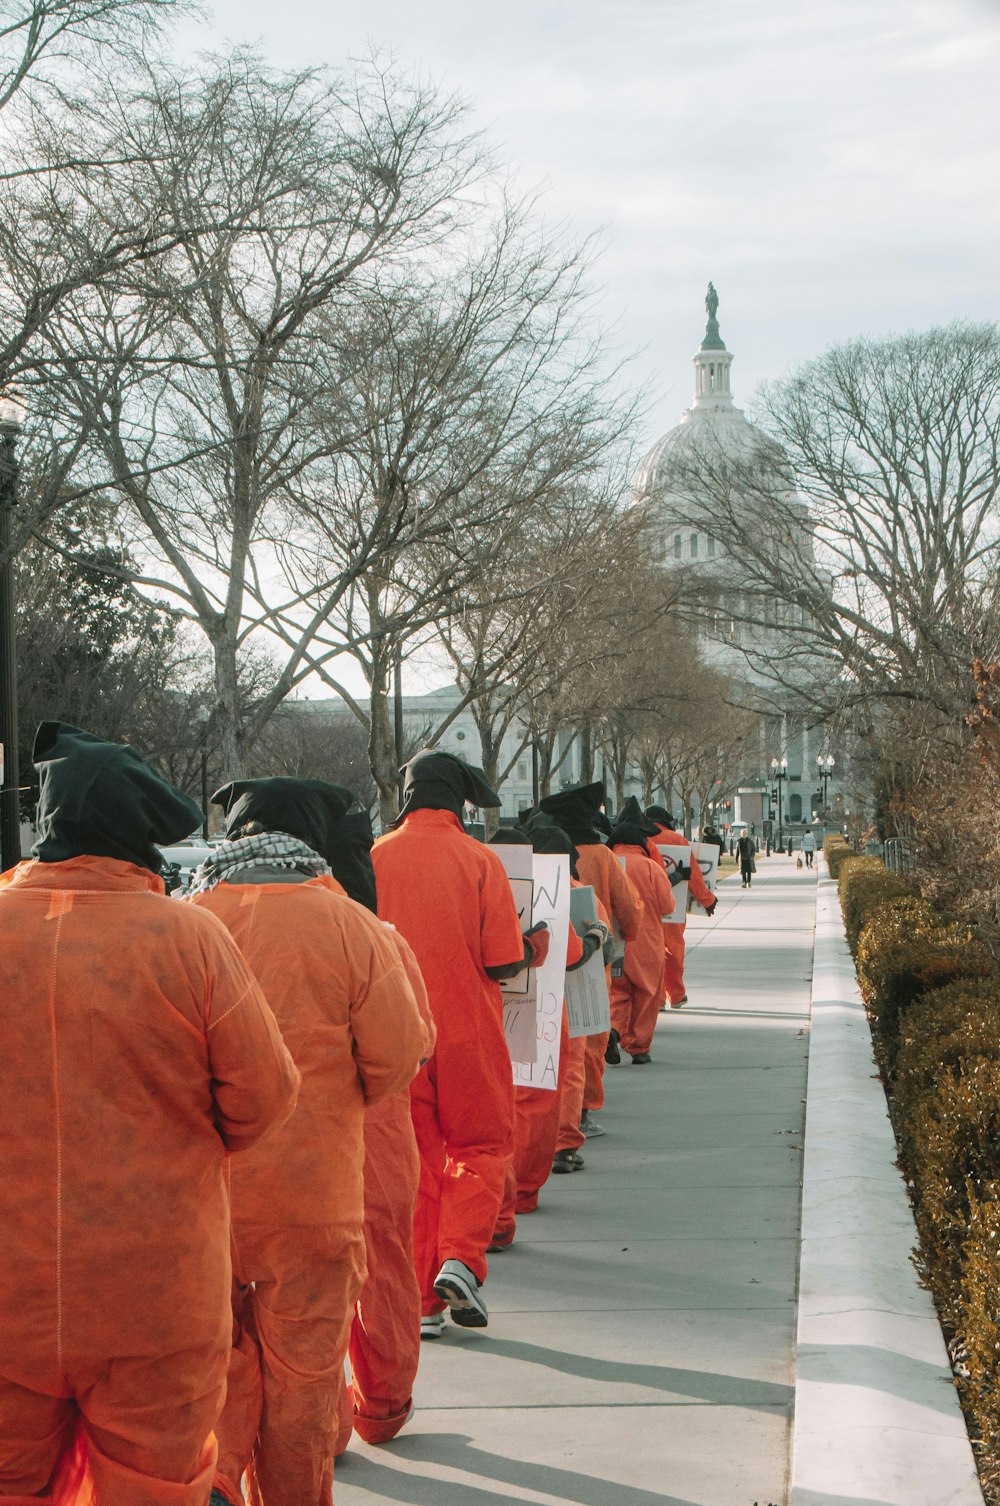 a group of people in orange outfits walking down a sidewalk